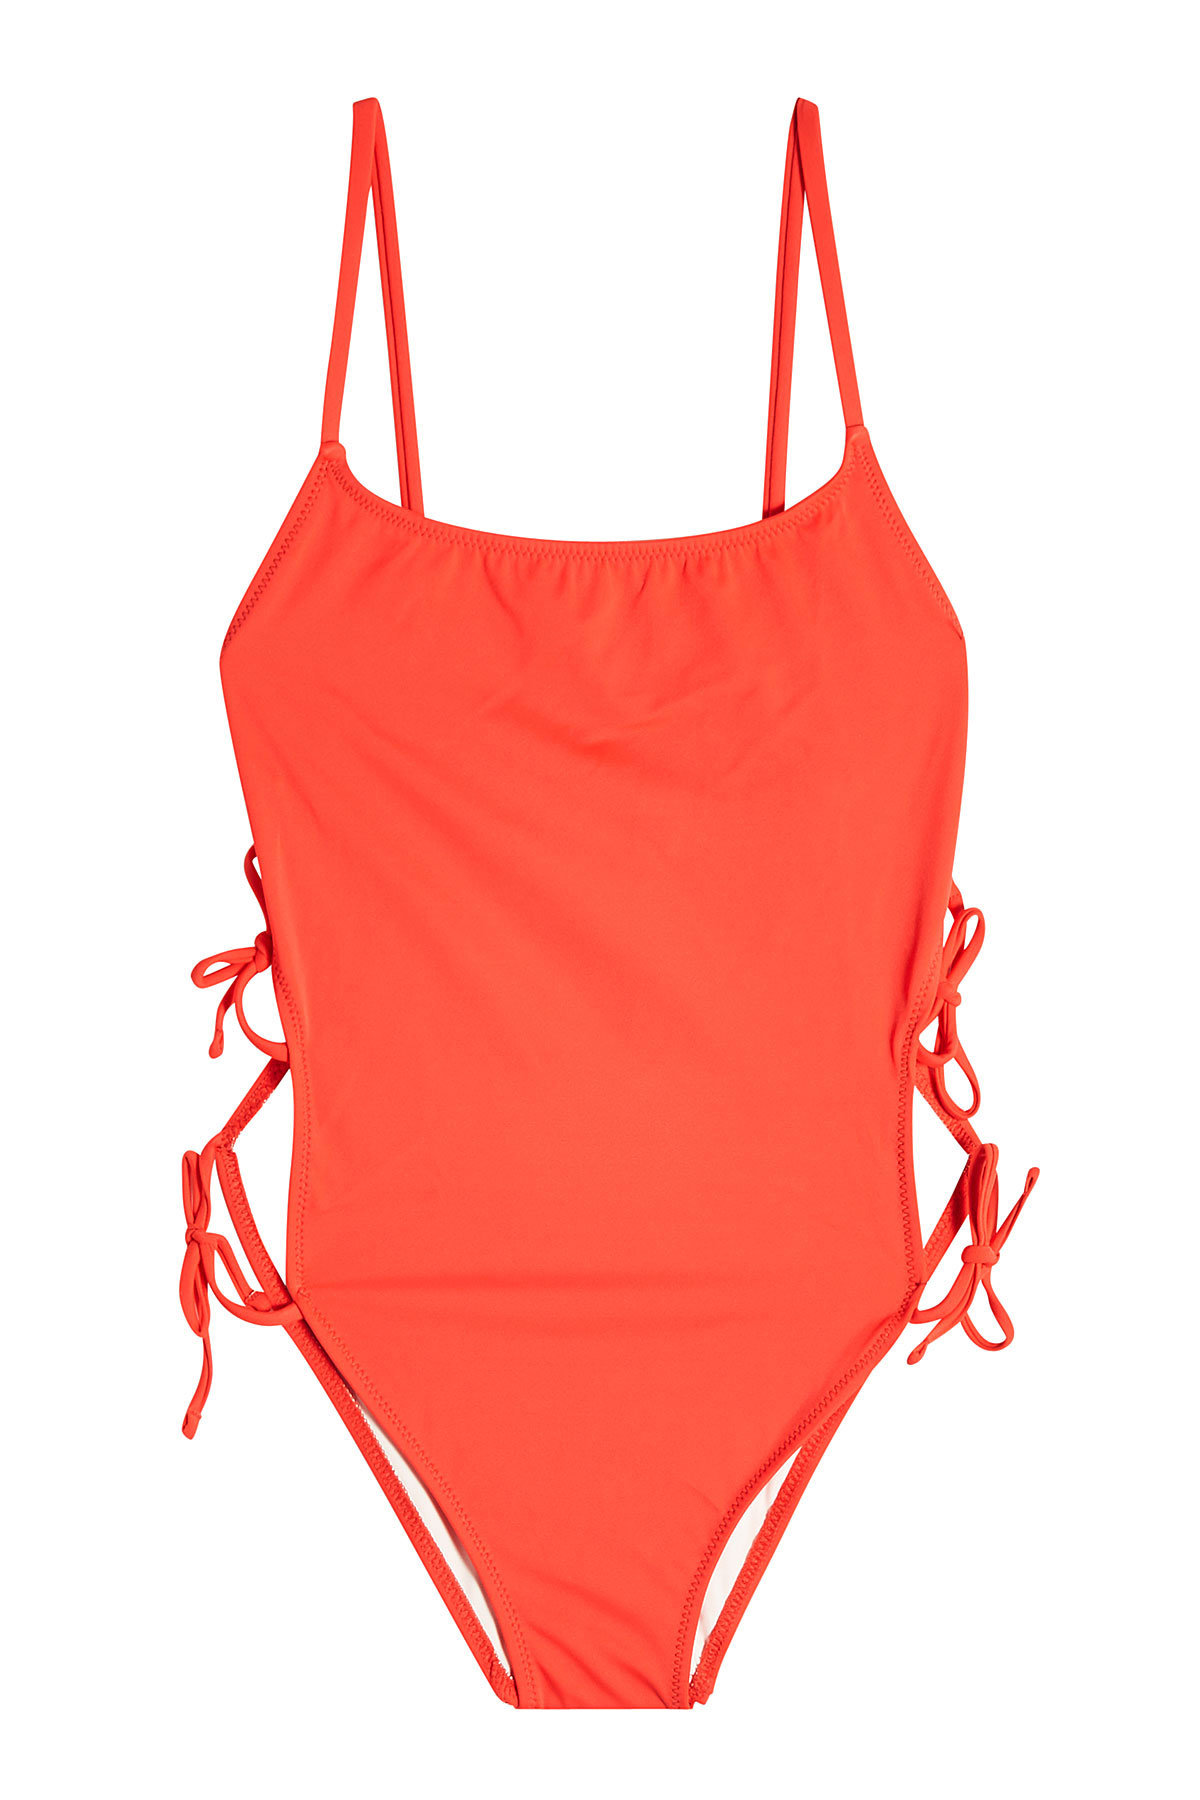 Solid & Striped - The Lily Swimsuit